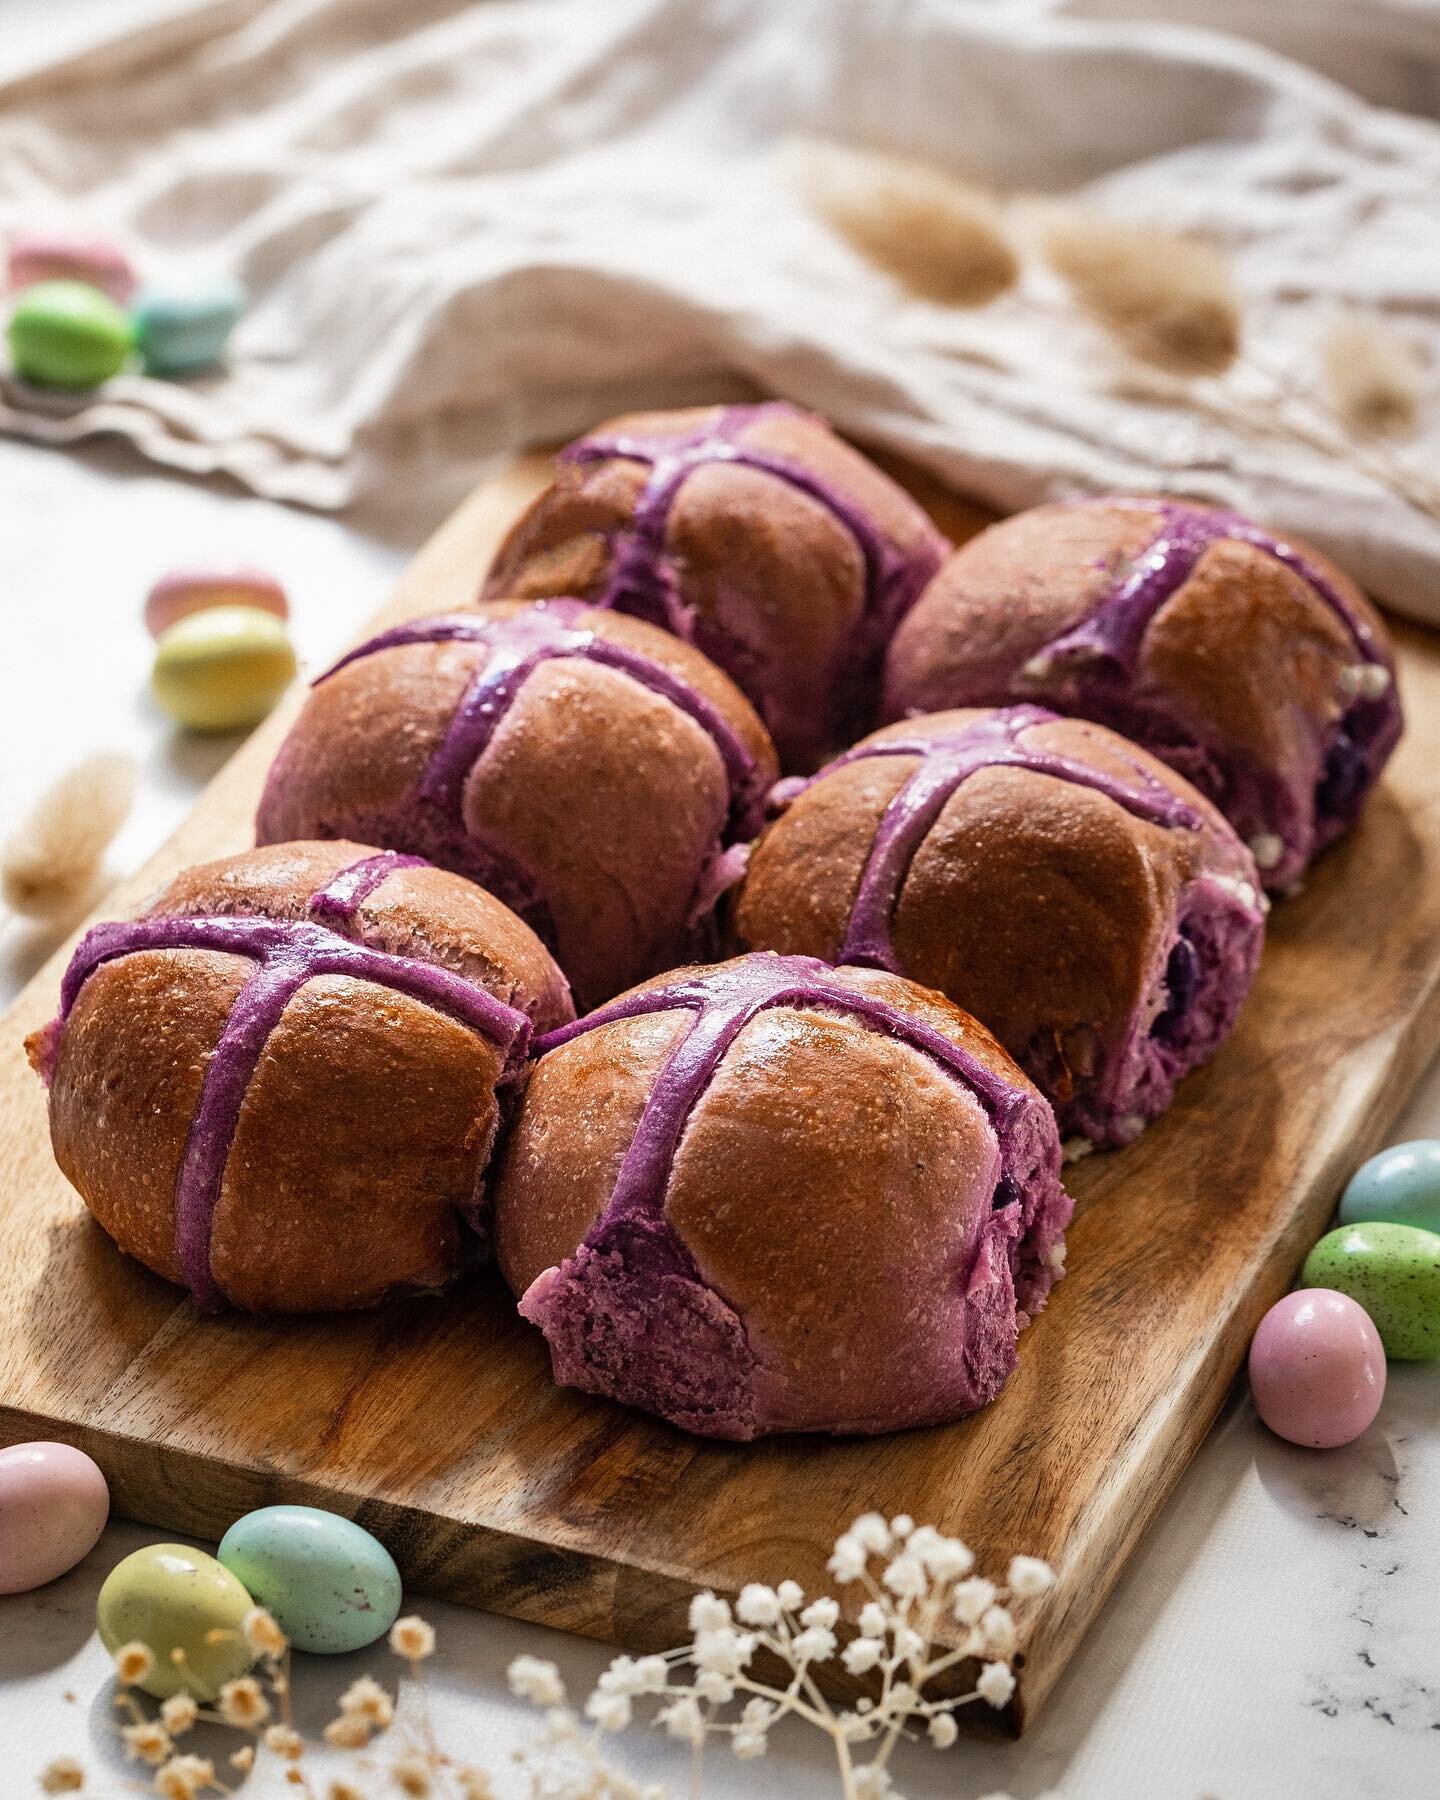 We&rsquo;ve got an extra special treat for you this Easter weekend.. Introducing UBE HXB&rsquo;s! 

Ube&nbsp;(Filipino purple yam) hot cross buns infused with white chocolate, filled with ube pastry cream and glazed in sugar syrup. 

Available this E